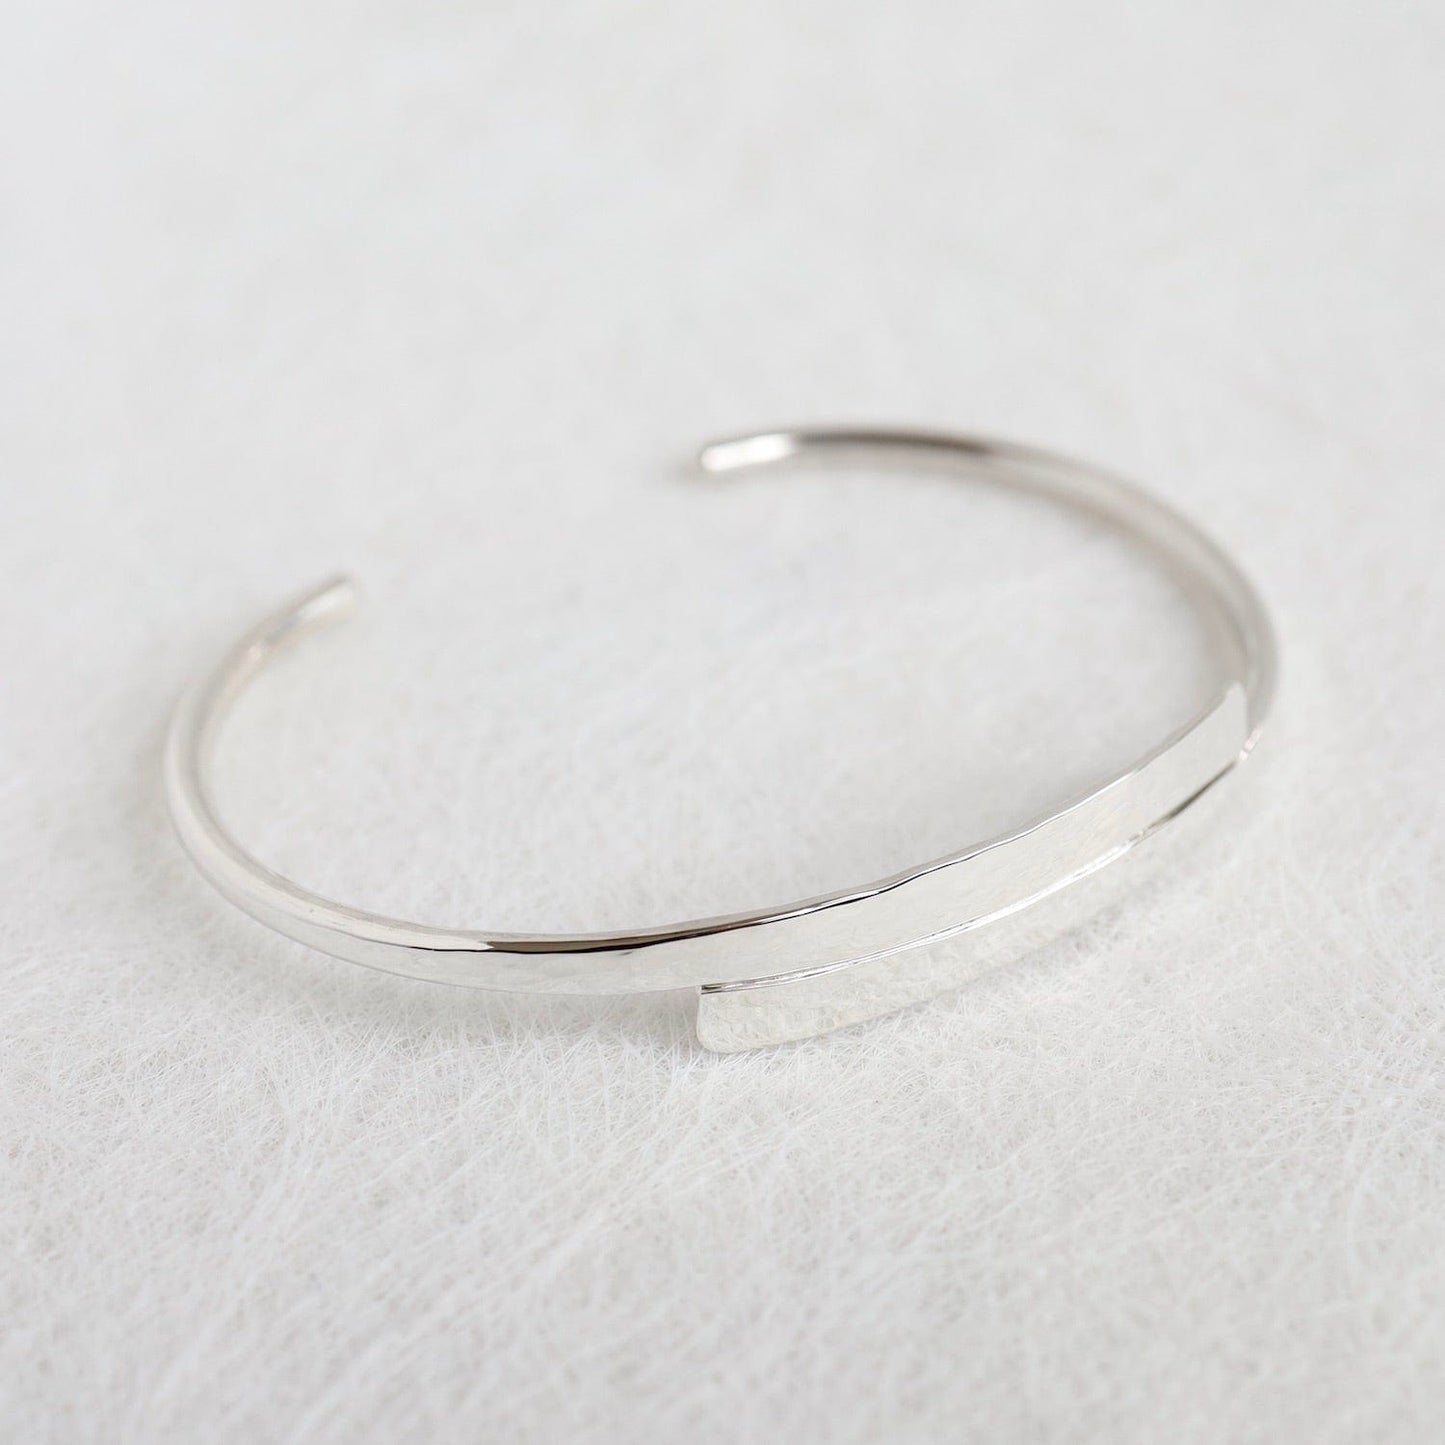 BRC Hammered Cuff With Overlap Center